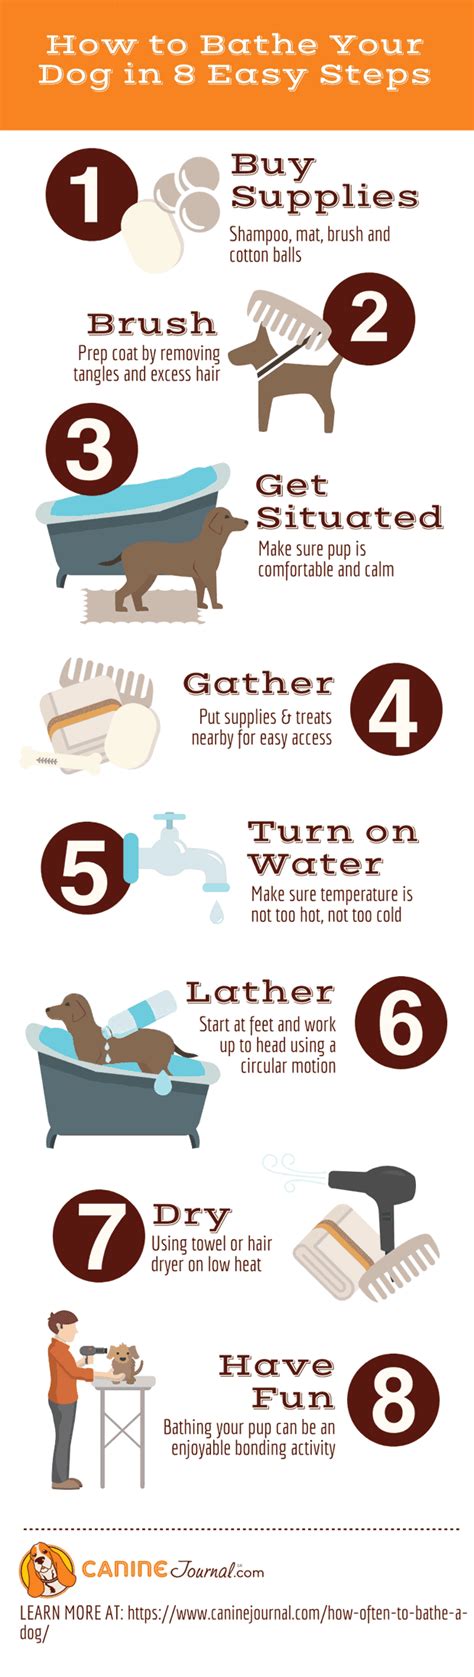 If you bathe them excessively, you will get rid of this layer that protects them, so it is not advisable to bathe them too. How Often You Should Bathe Your Dog (Plus 8 Bathing Tips ...